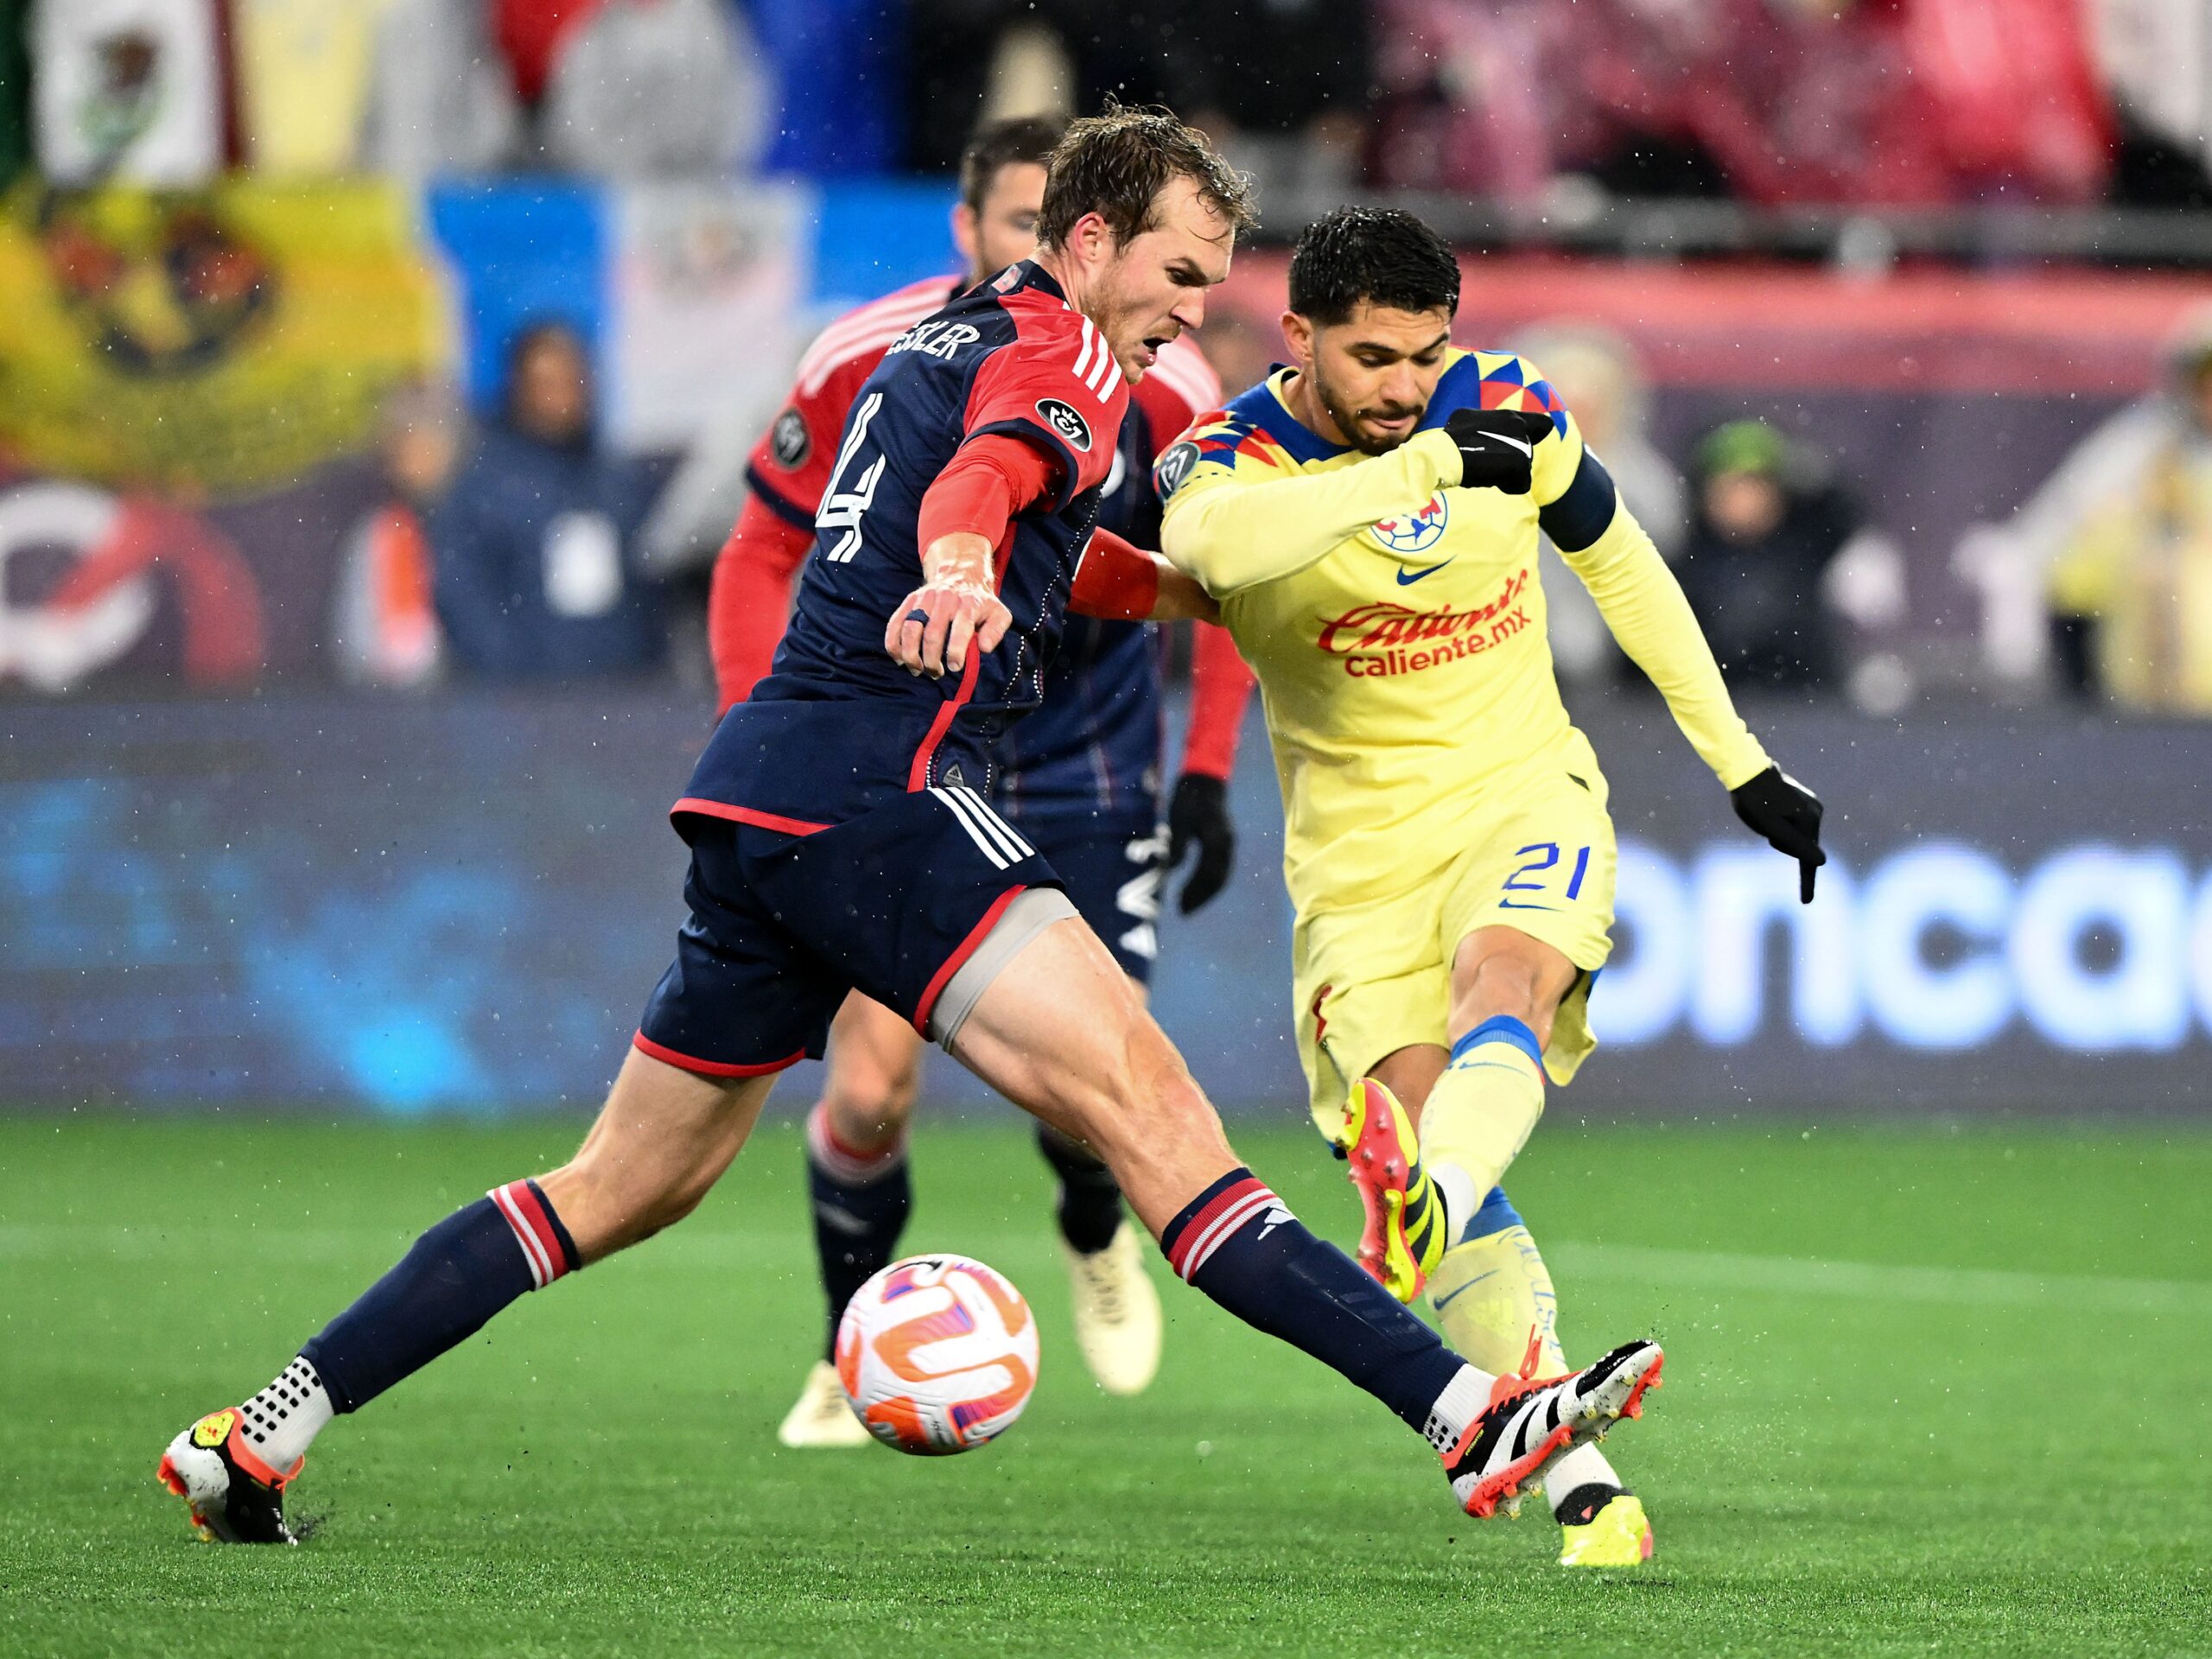 Club America Player Henry Martin Has Big Night in Champions Cup Second Leg Victory Over the New England Revolution